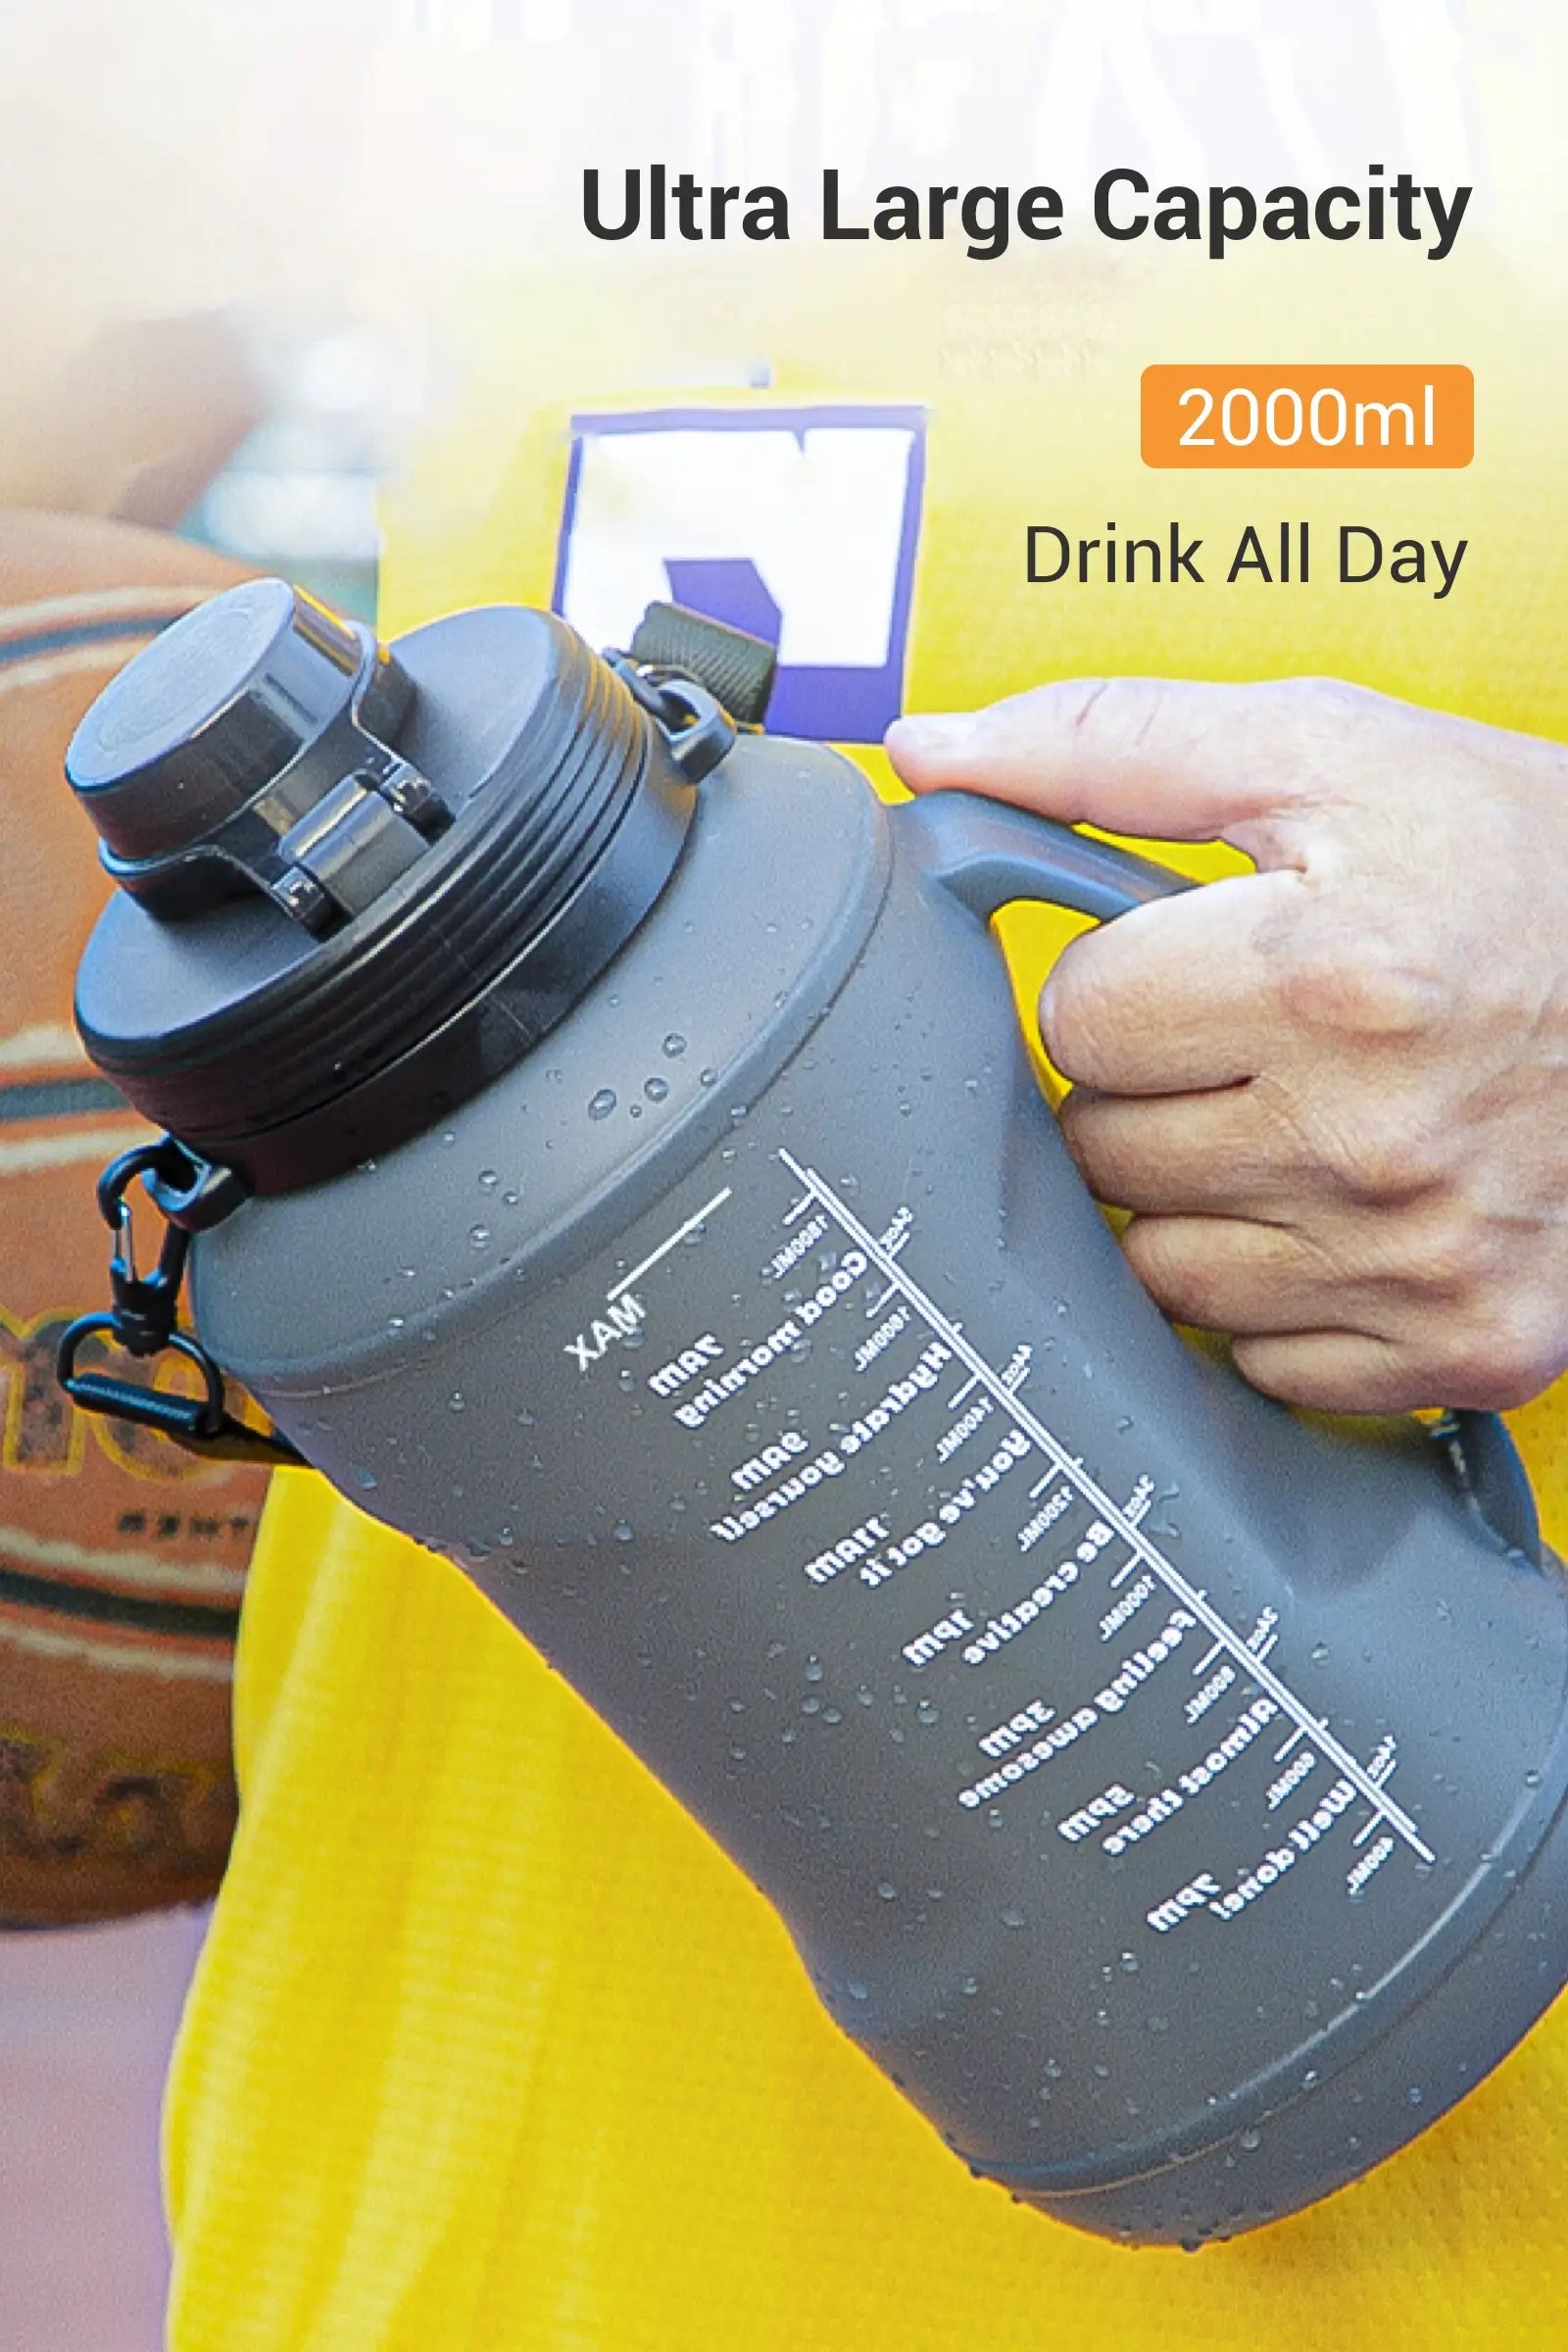 Ultra Large Capacity 2000ml, Drink All Day